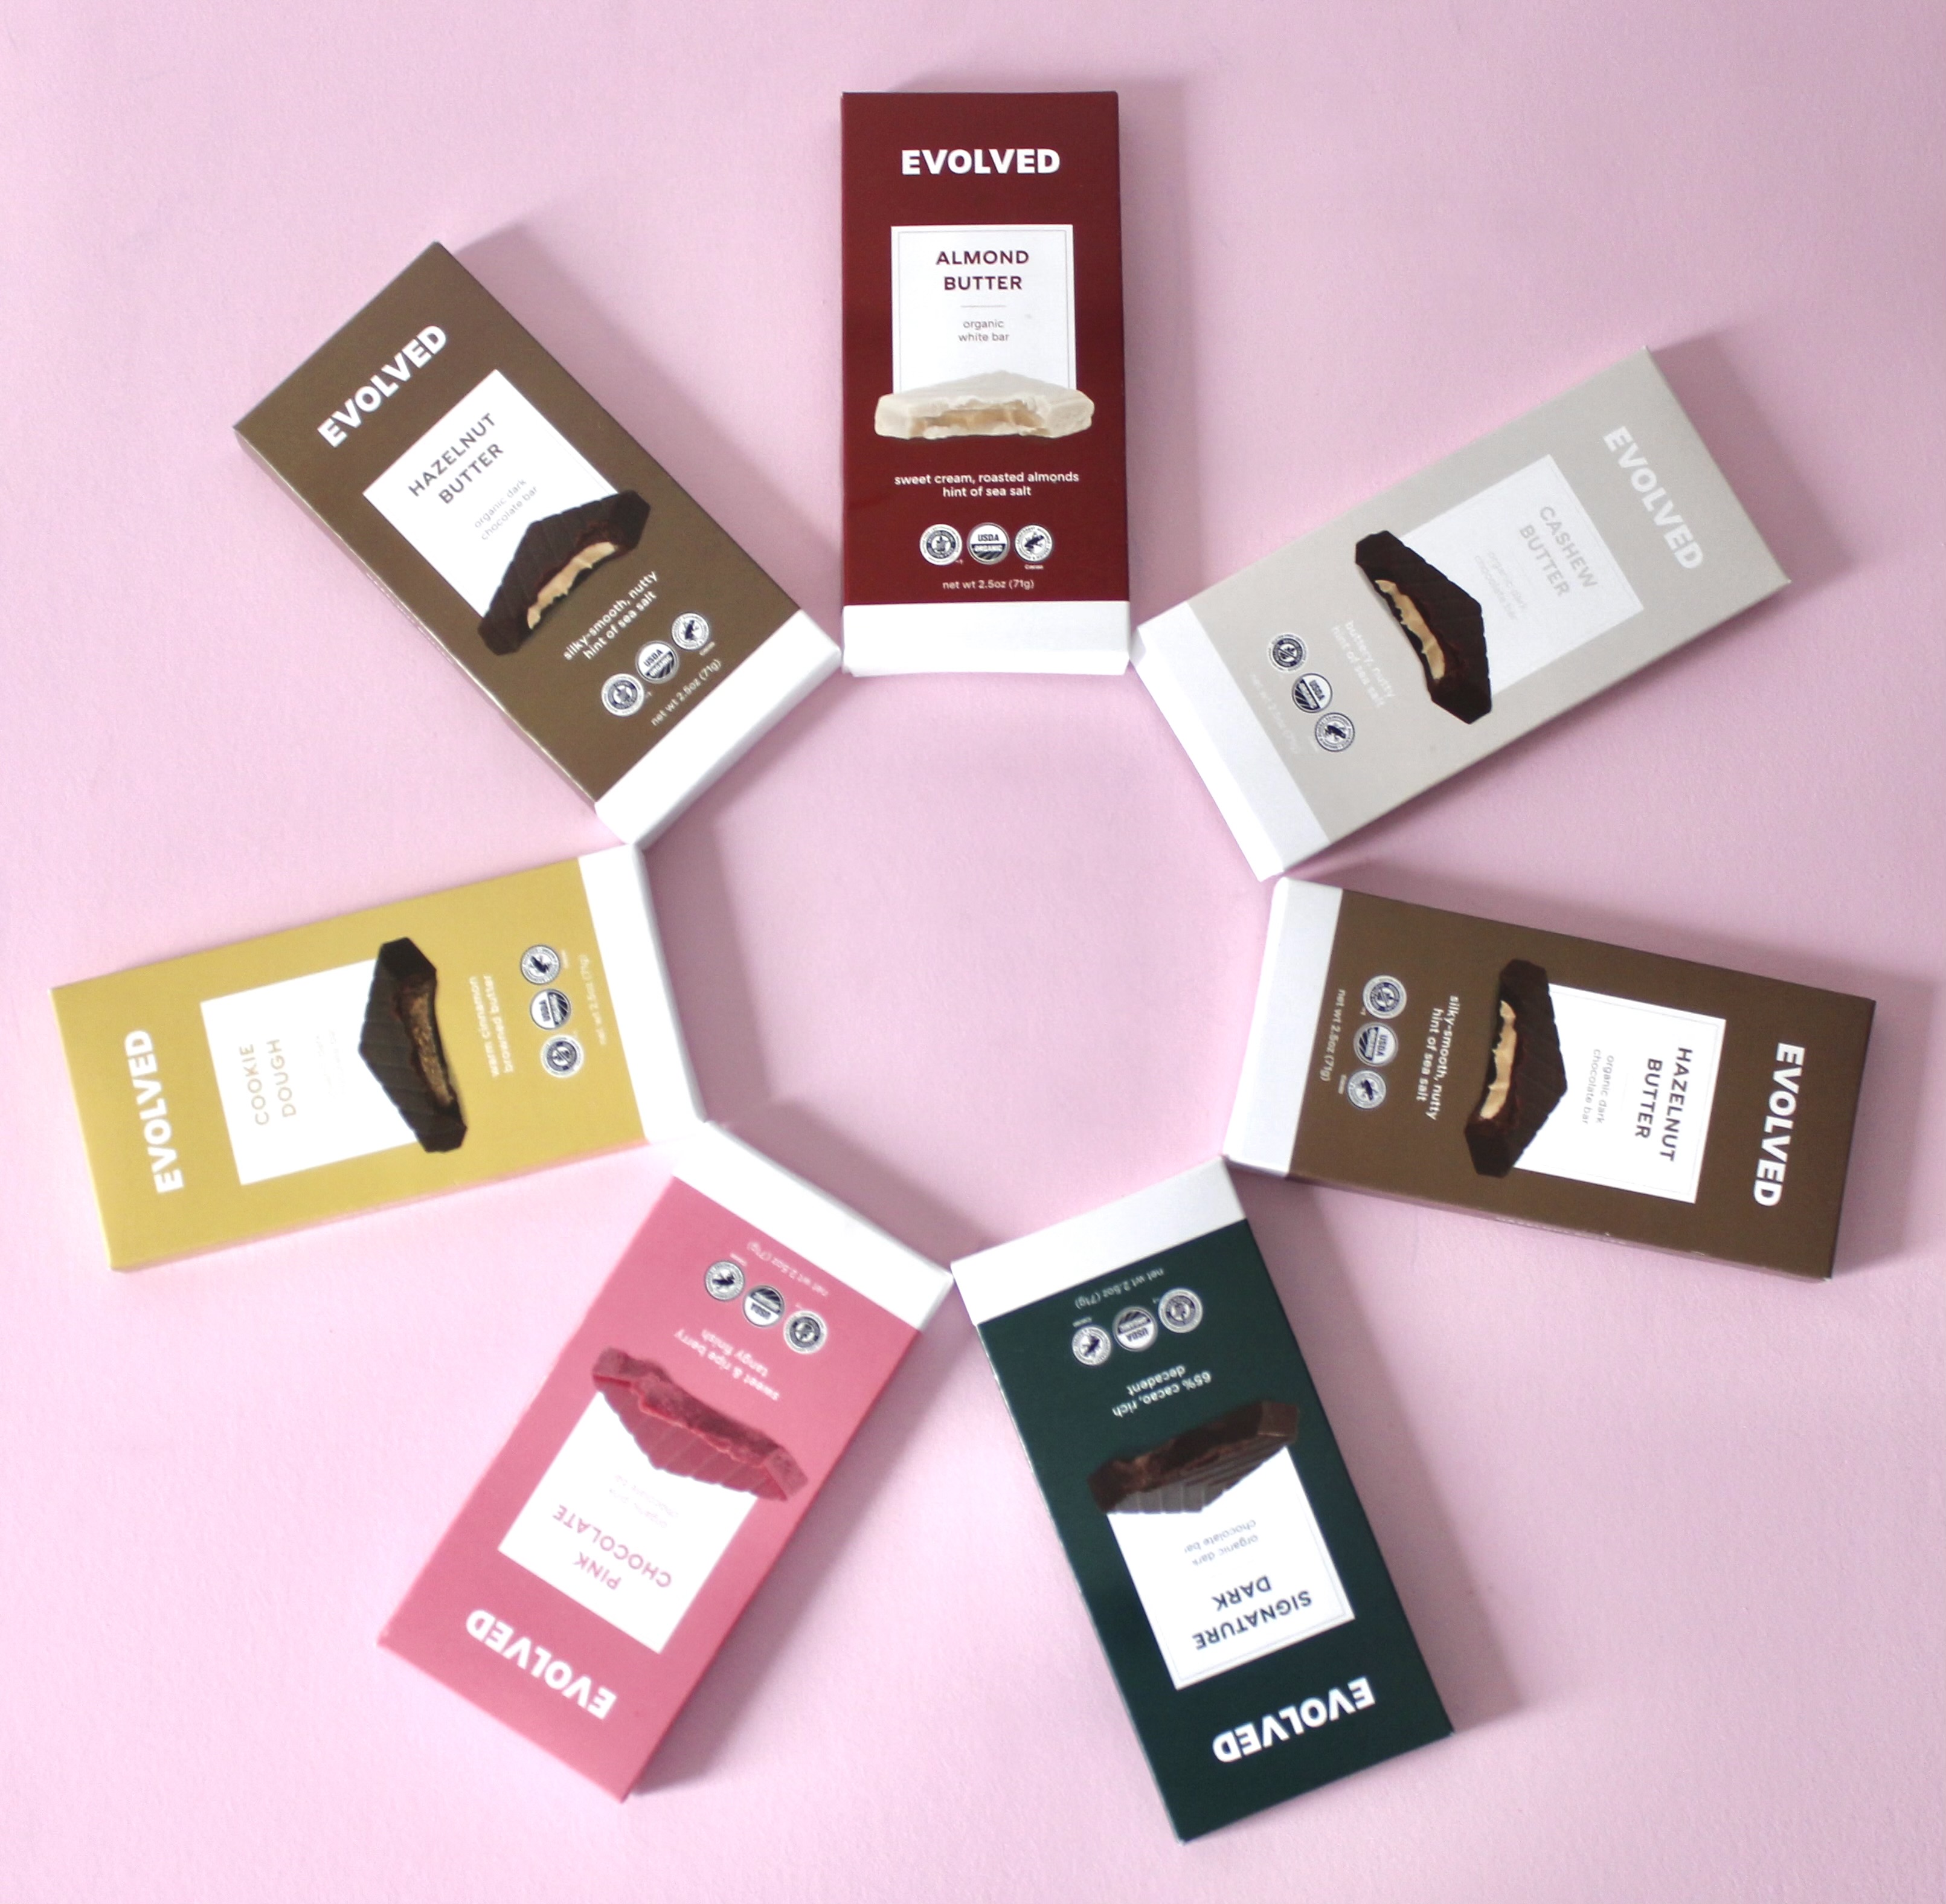 A New Chapter for Chocolate: EVOLVED Appoints Joe Serventi as CEO